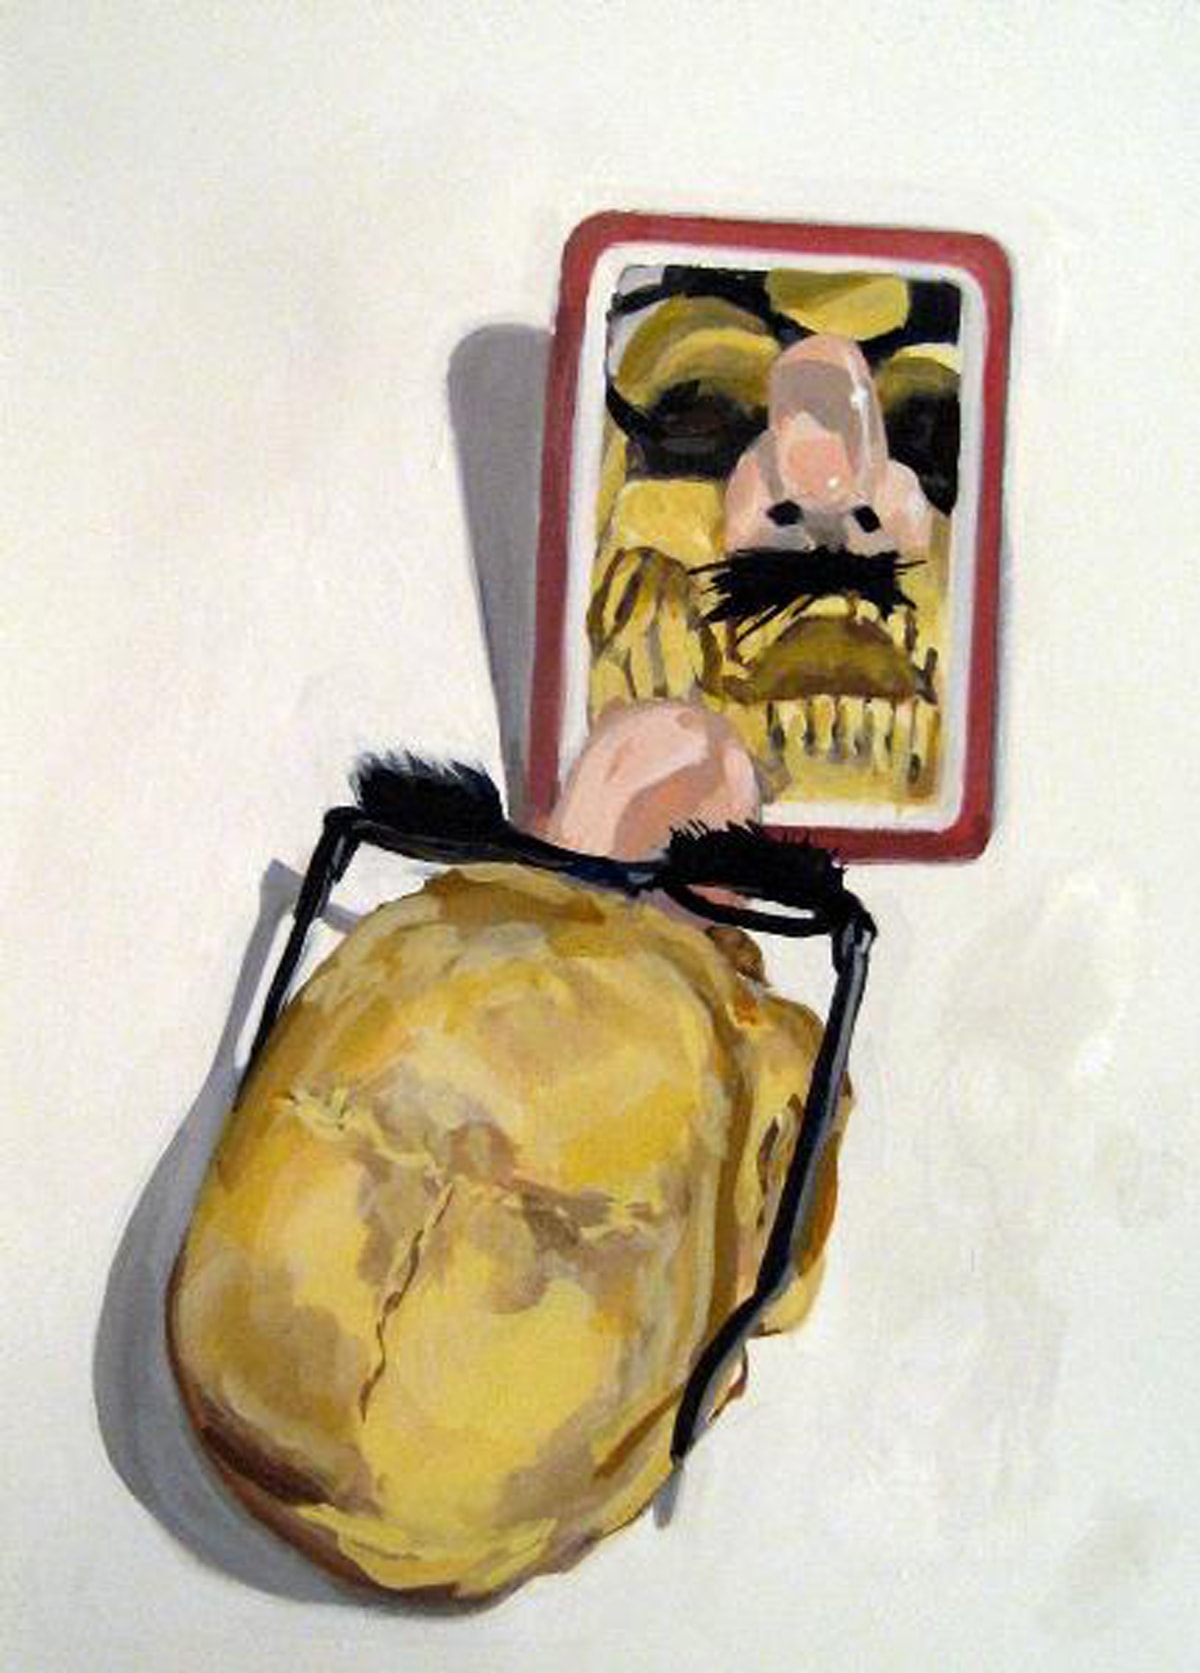 Doug Parry's Incognito painting shows a skull with Groucho Marx glasses and mustache looking in a mirror